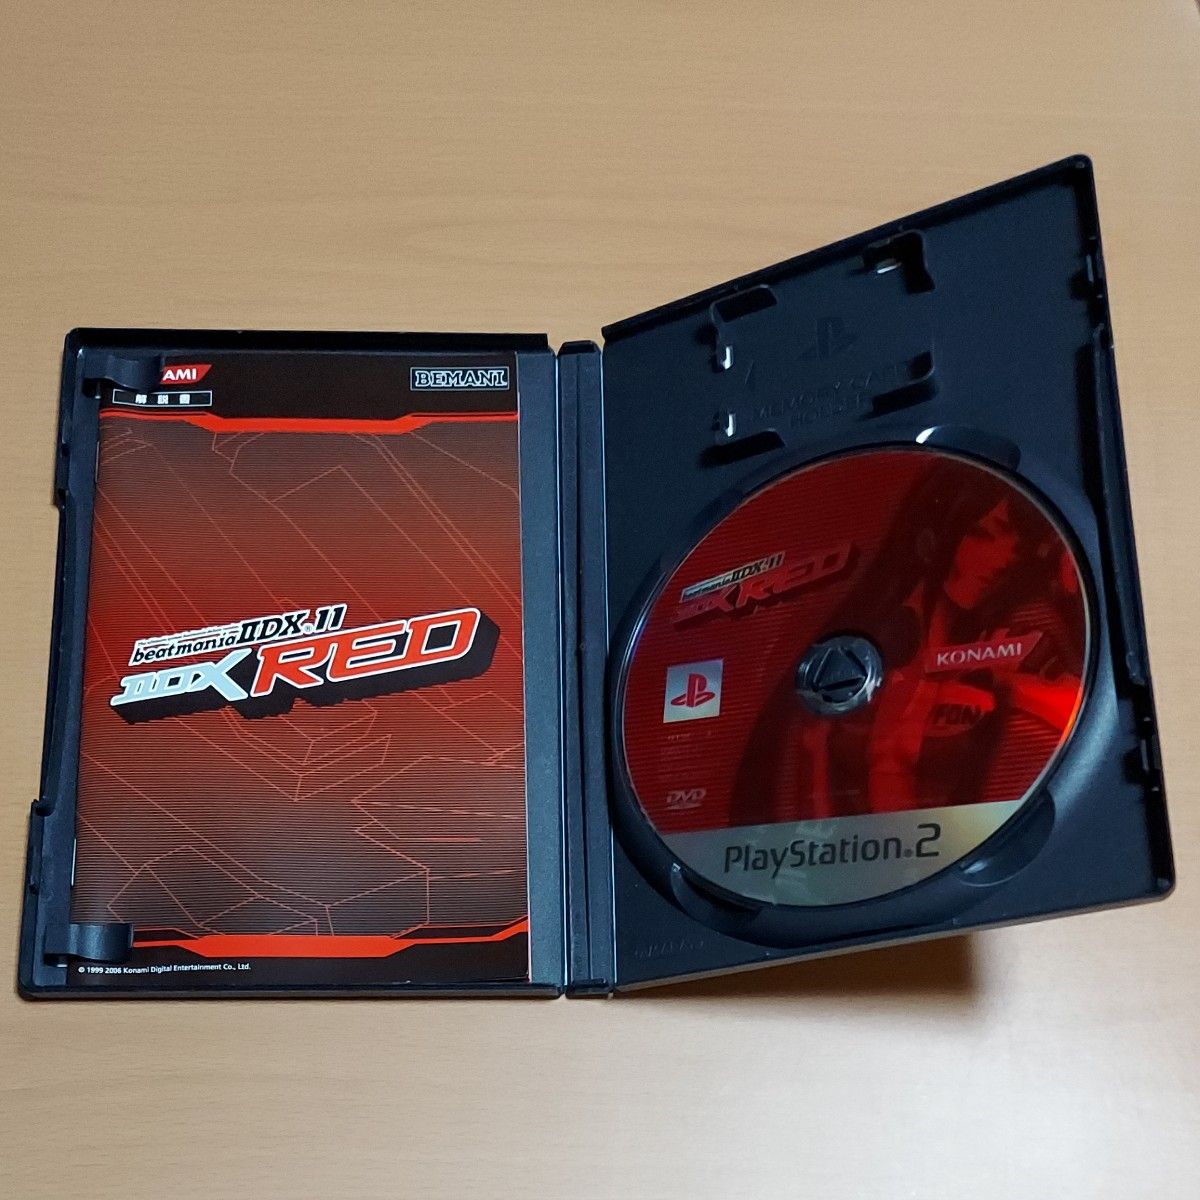 【PS2】 beatmania II DX 11 II DX RED　ビートマニア　１１